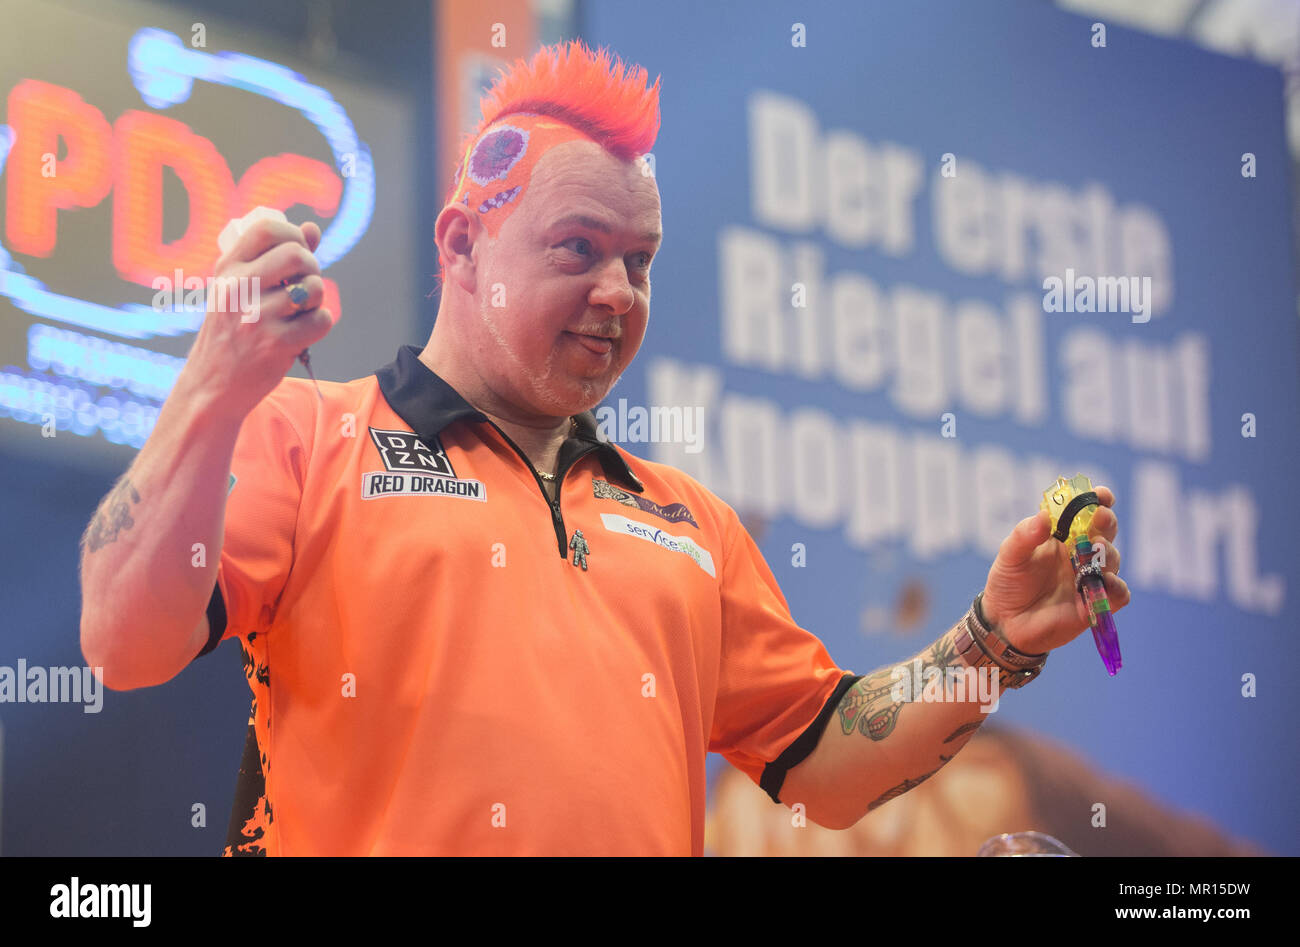 25 May 2018, Germany, Gelsenkirchen Peter Wright of Scotland pictured during the German Darts Masters in